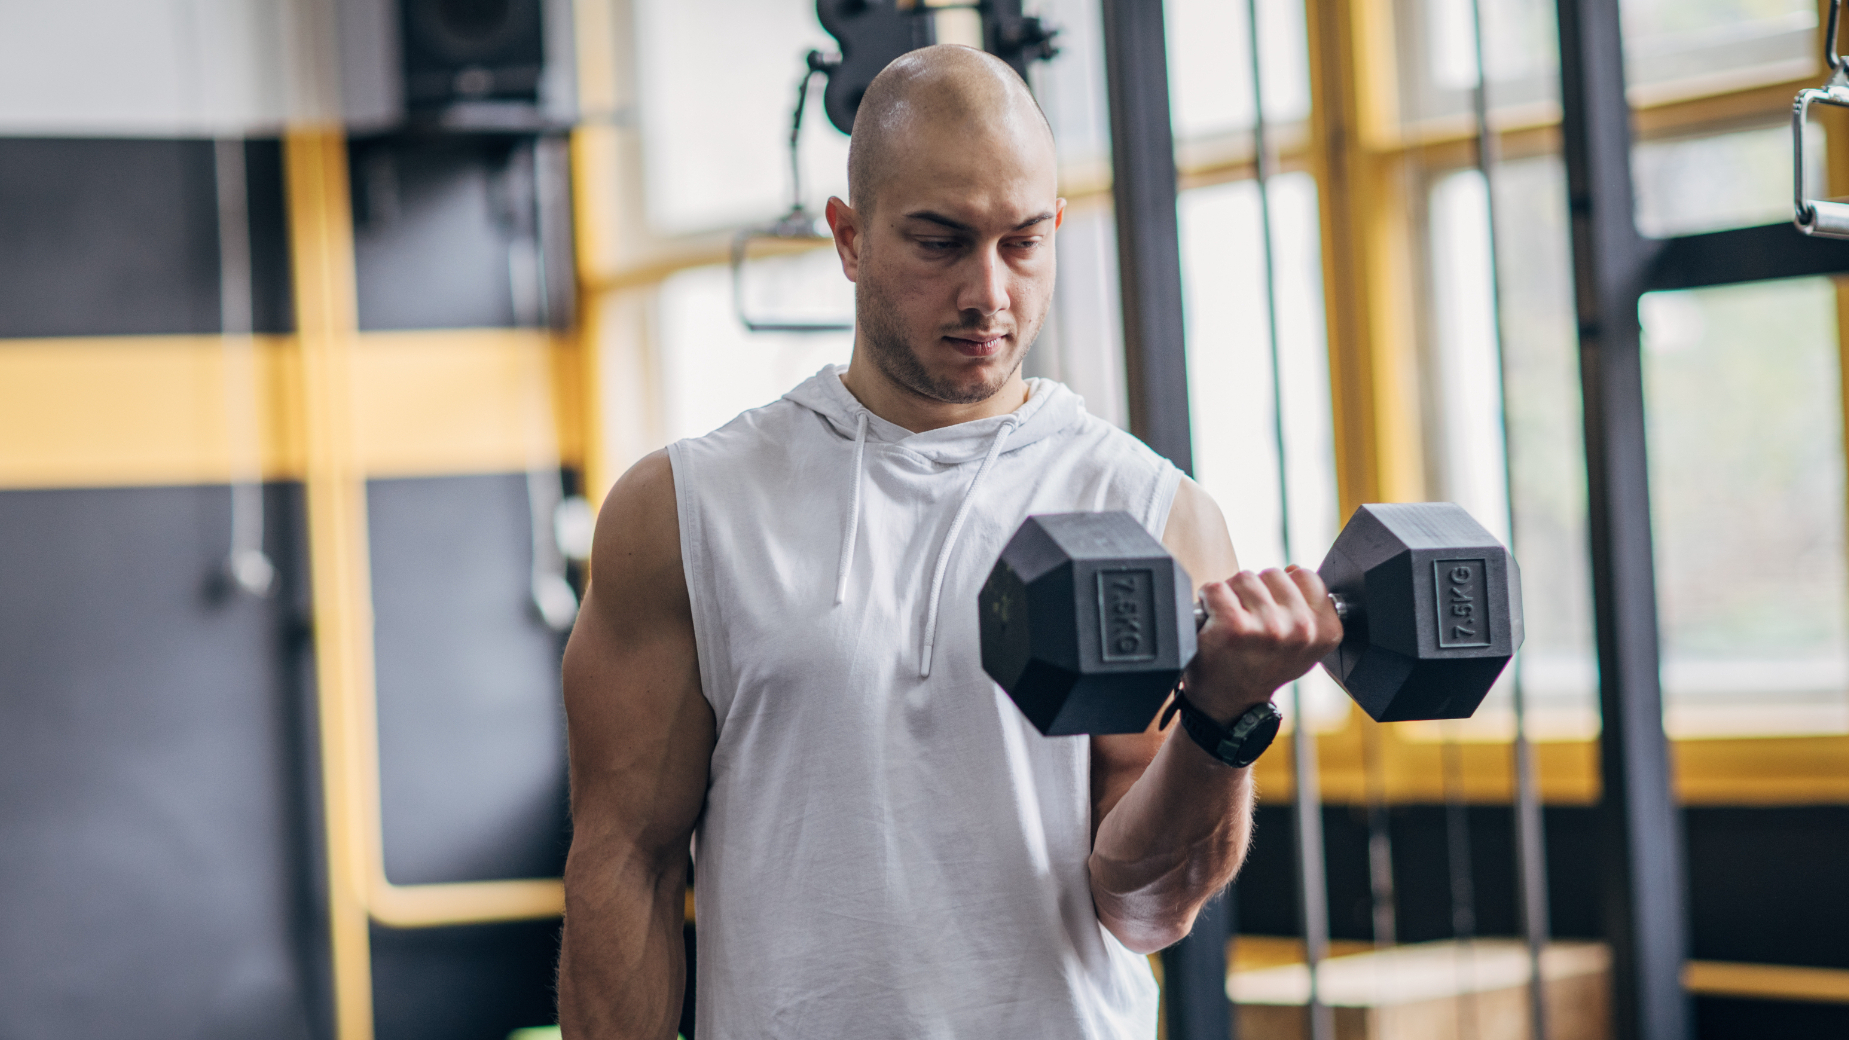 Do you really need to lift heavy weights for muscle growth?